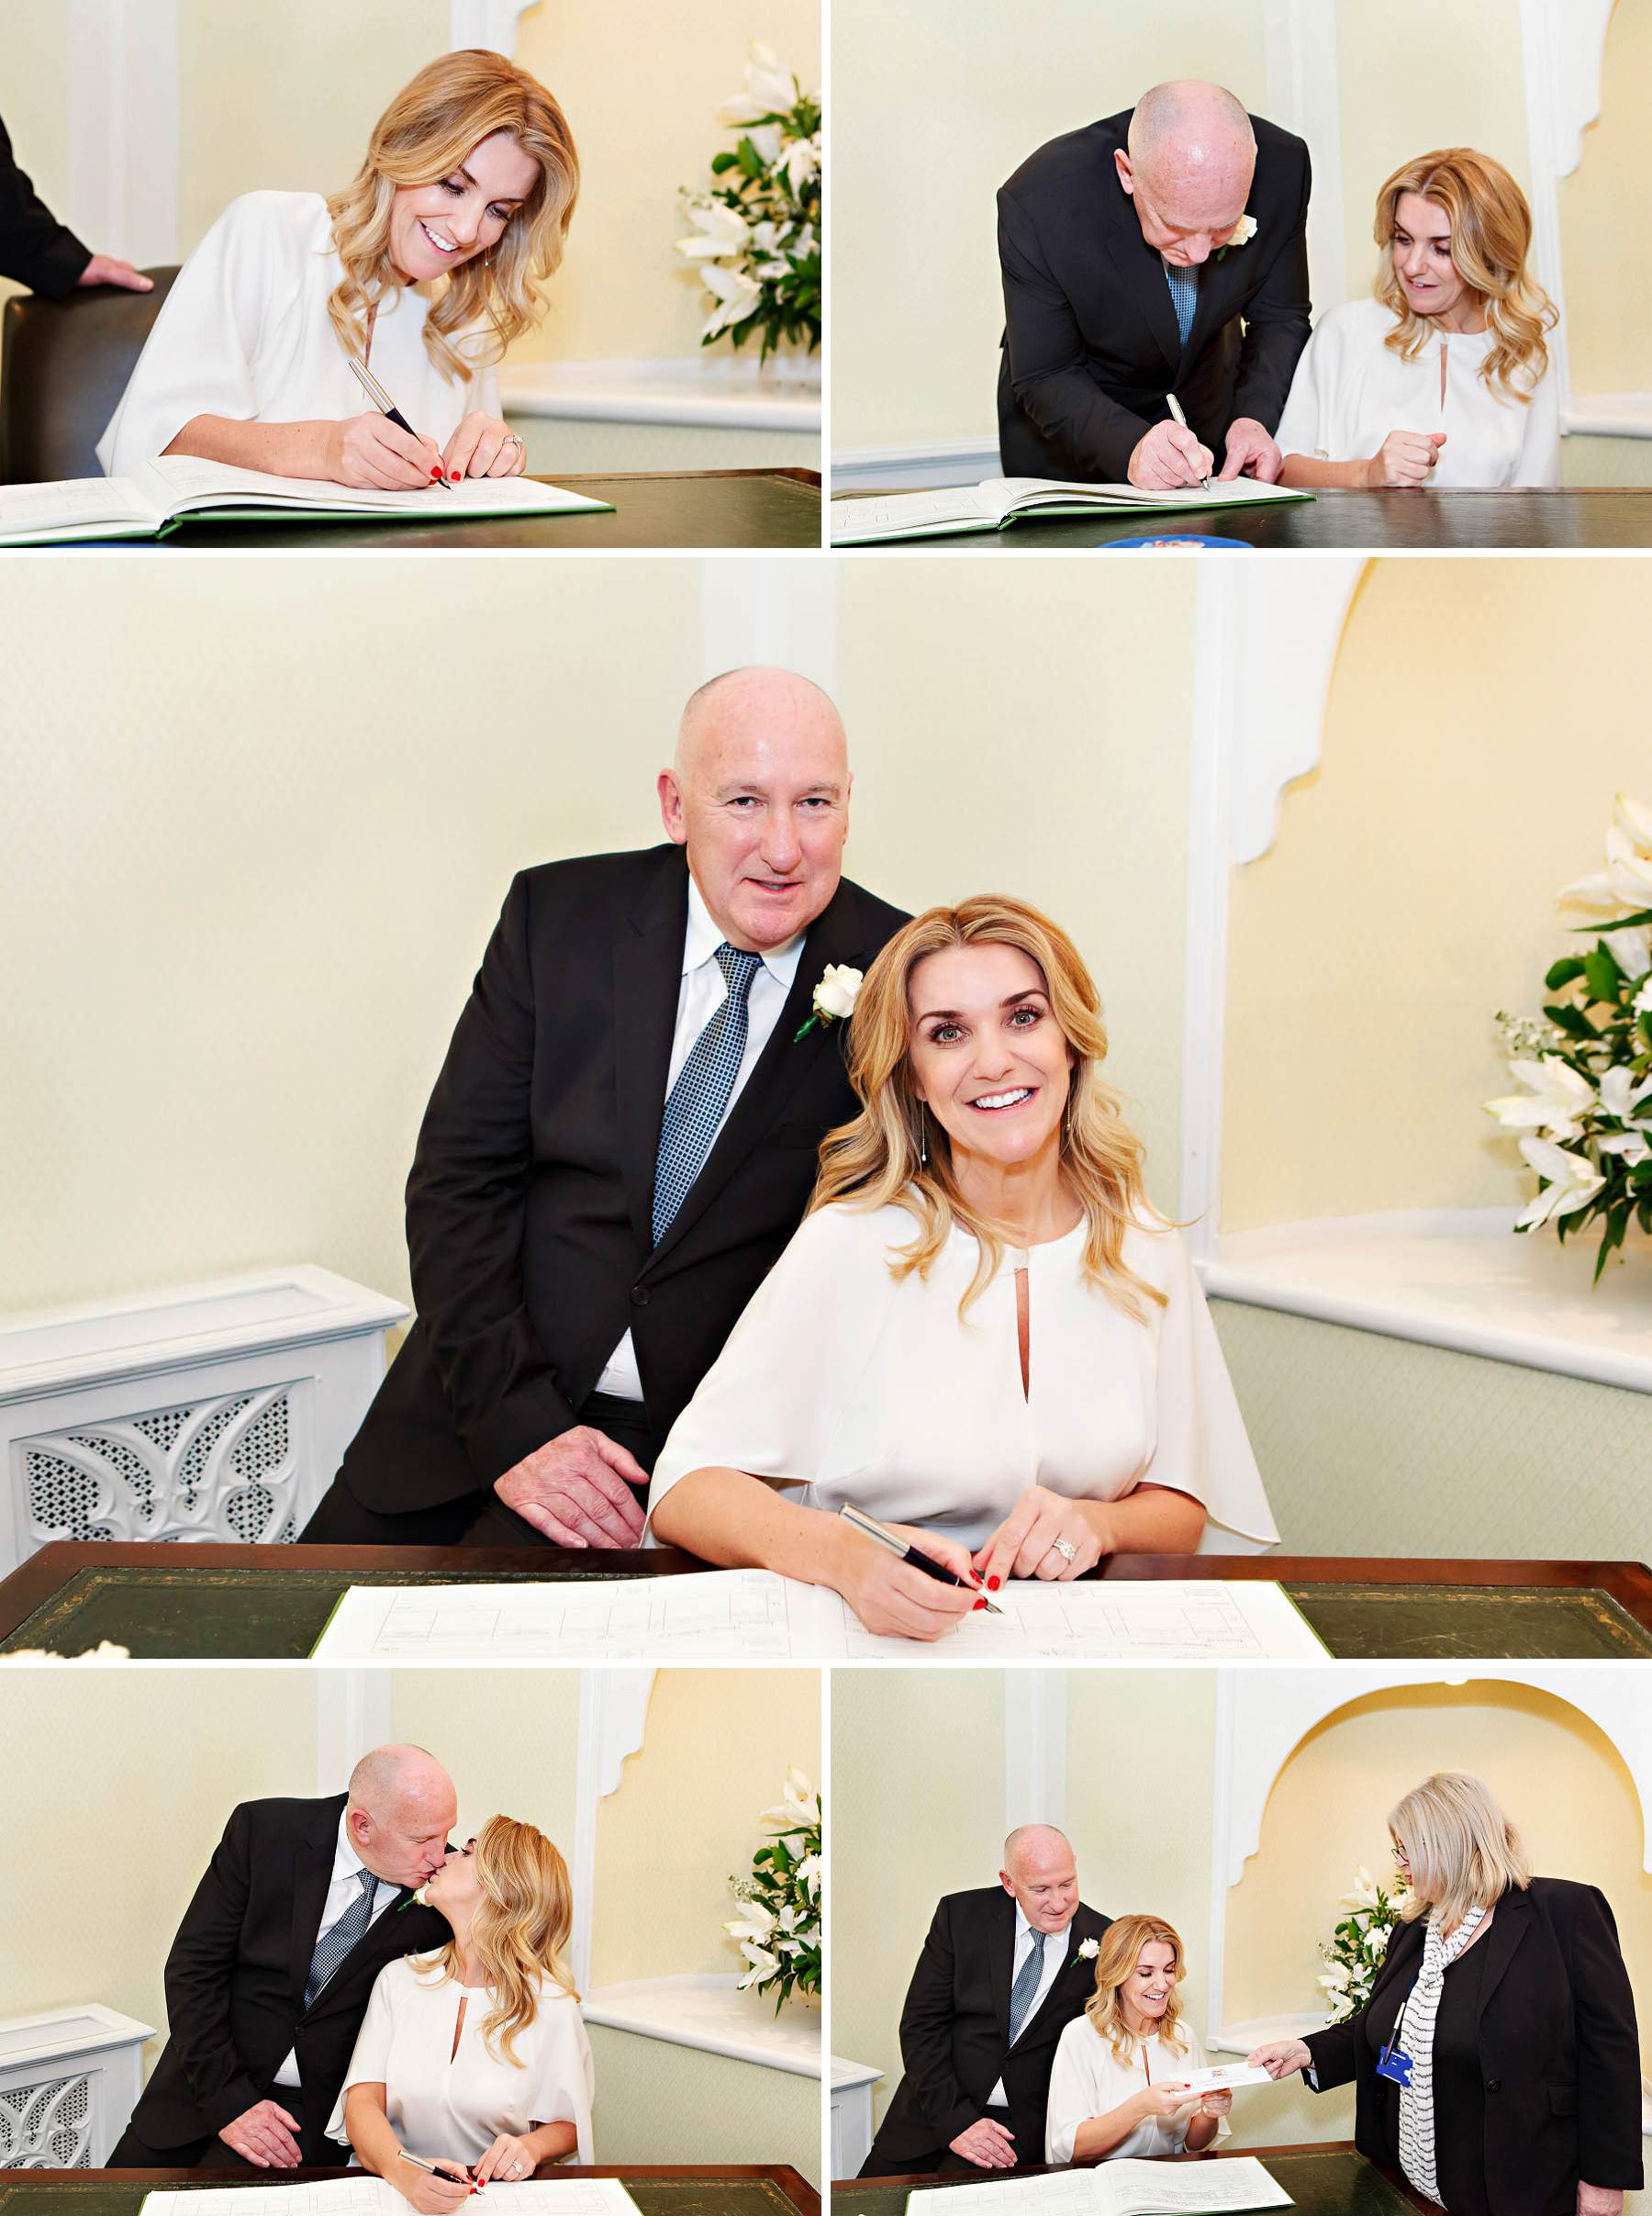 The bride and groom sign the register during their civil wedding ceremony in the Rossetti Room at Kensington and Chelsea Register Office